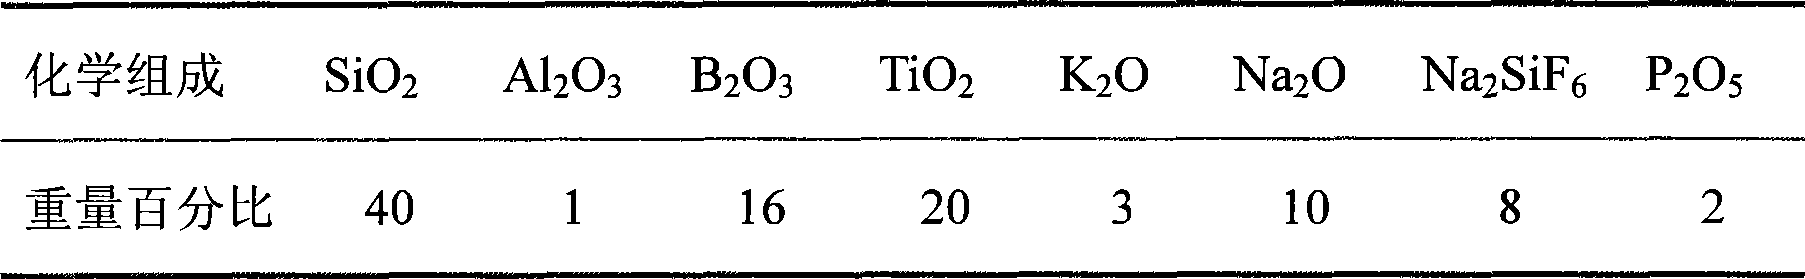 Photocatalytic self-cleaning nano-titania porcelain enamel substrate and method for preparing same